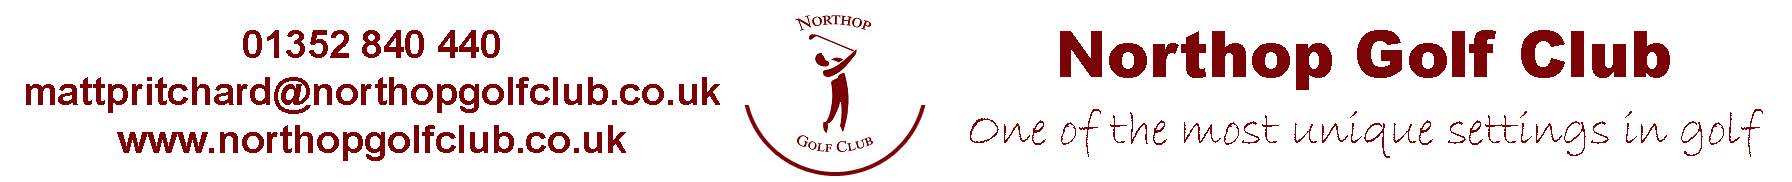 Northop Golf Club as recommended by Your Golfer Magazine